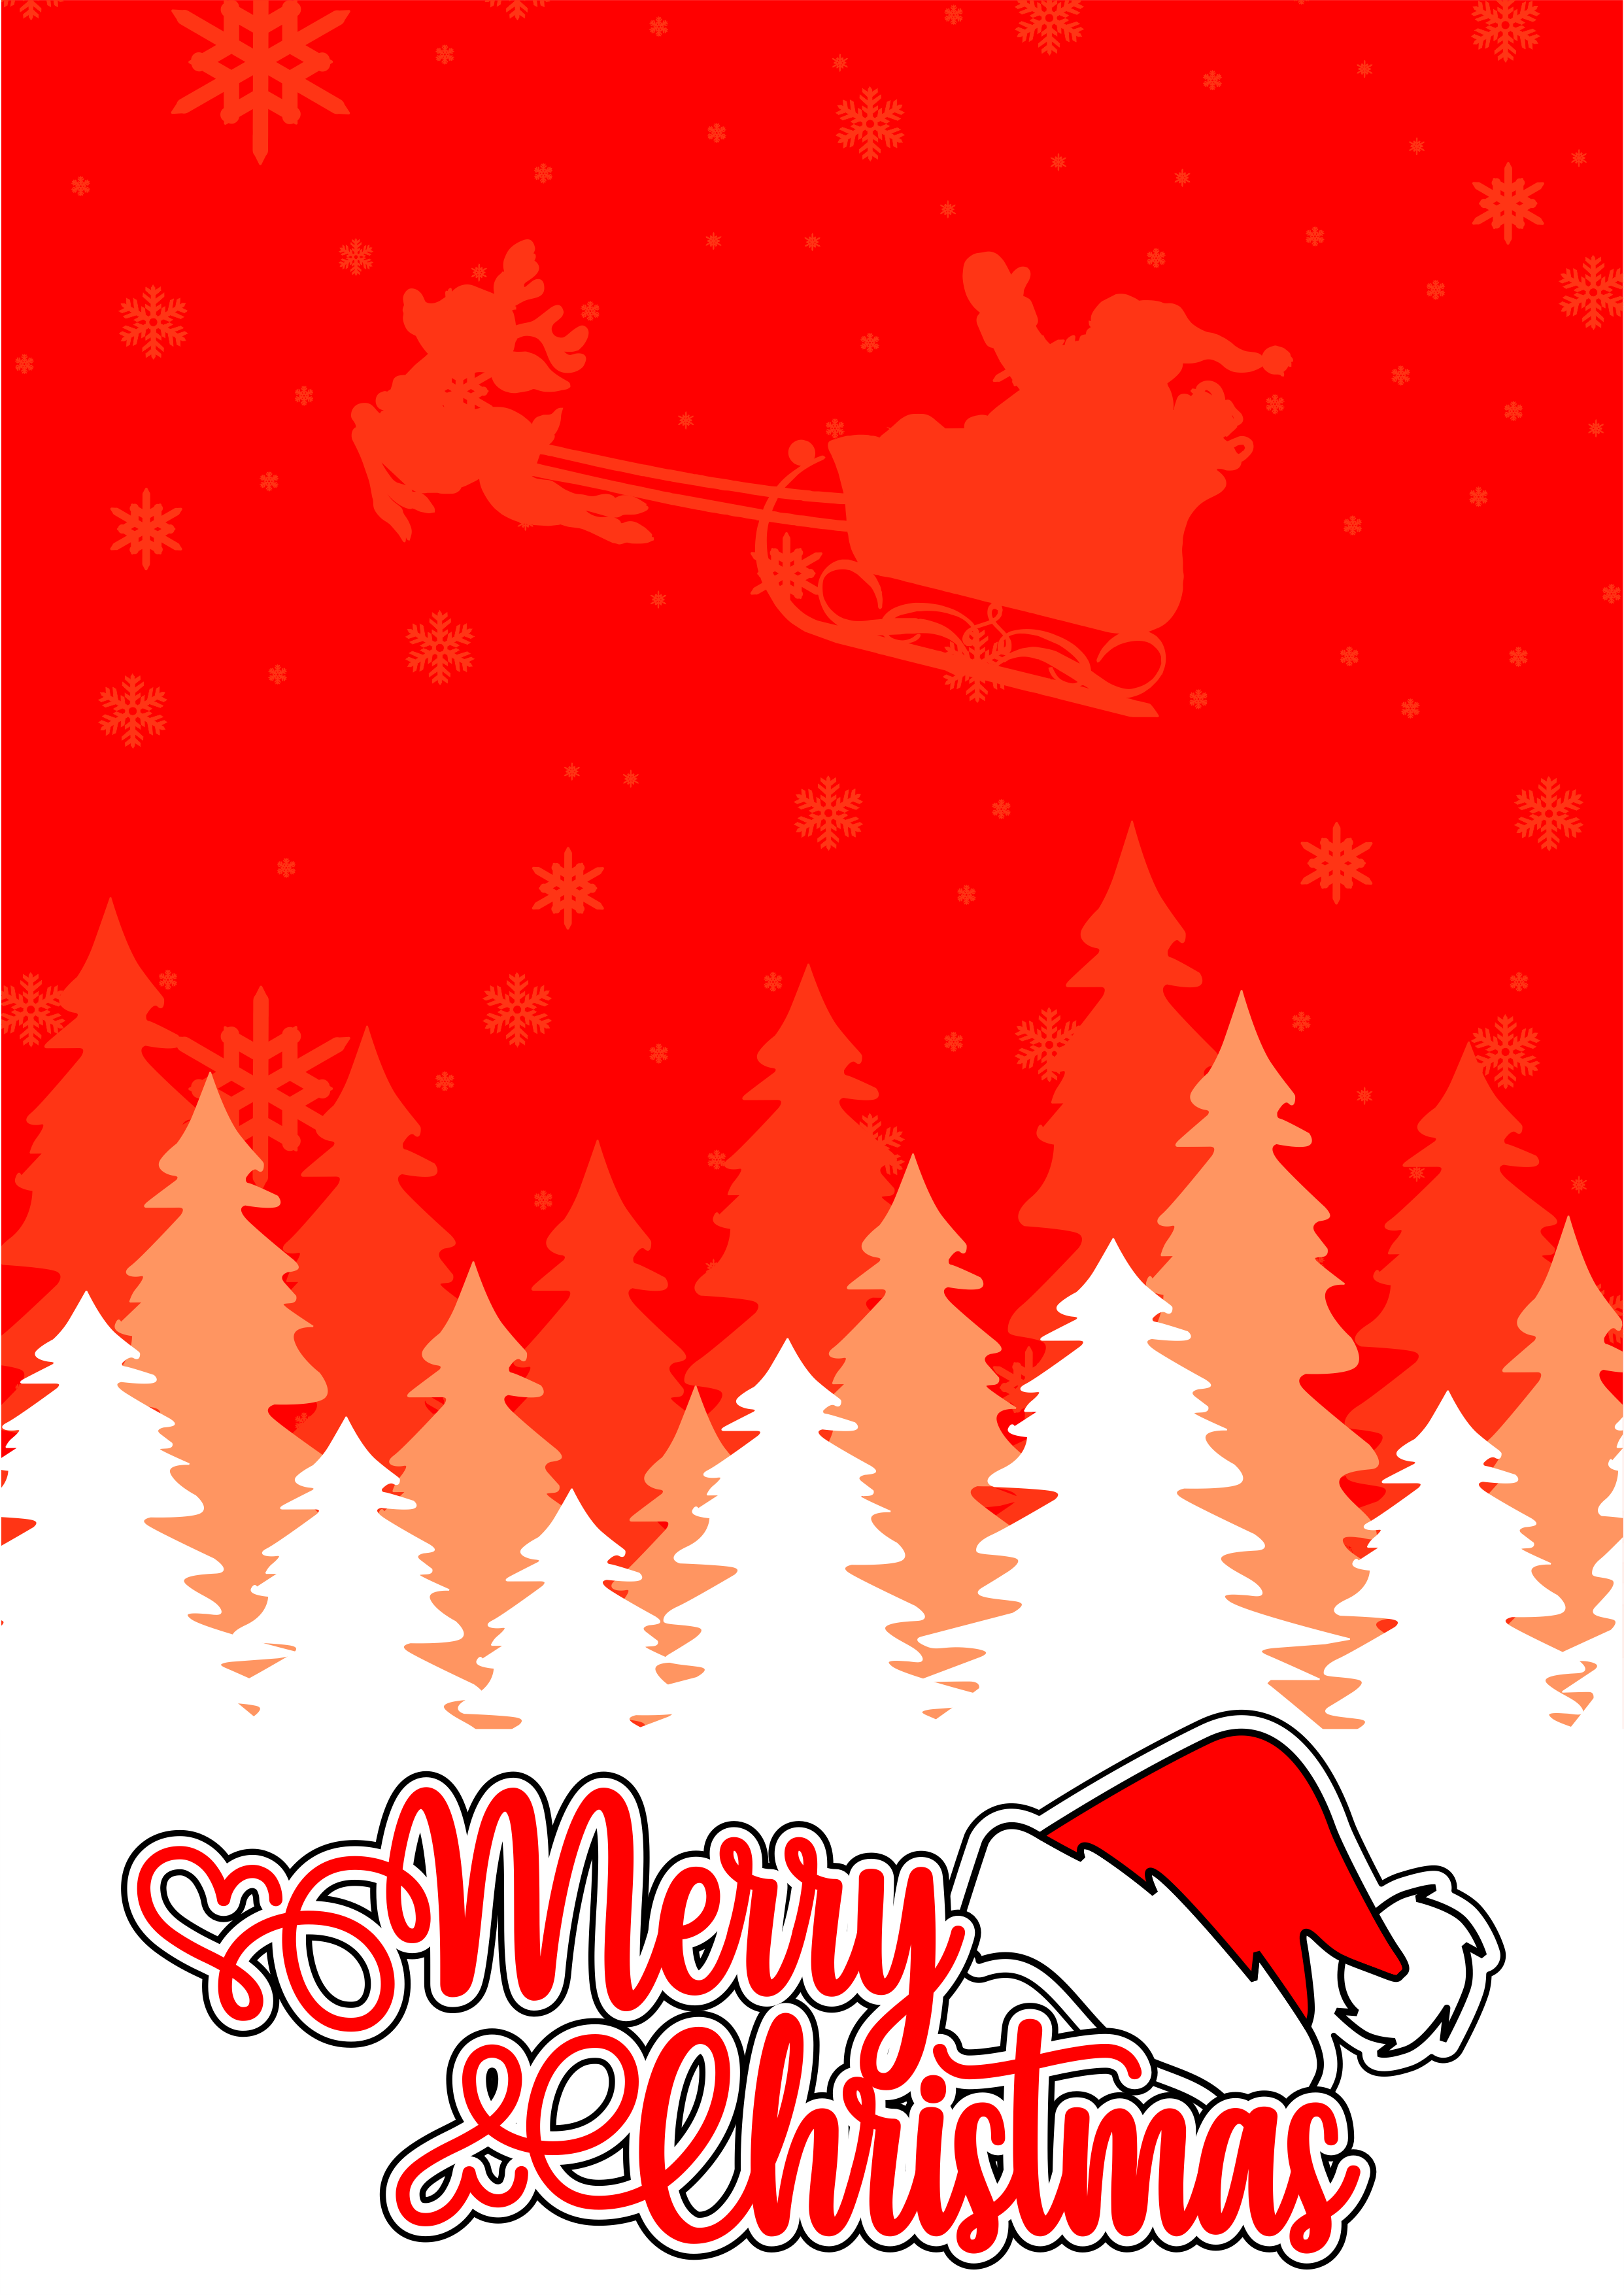 Merry Christmas wallpaper clipart png